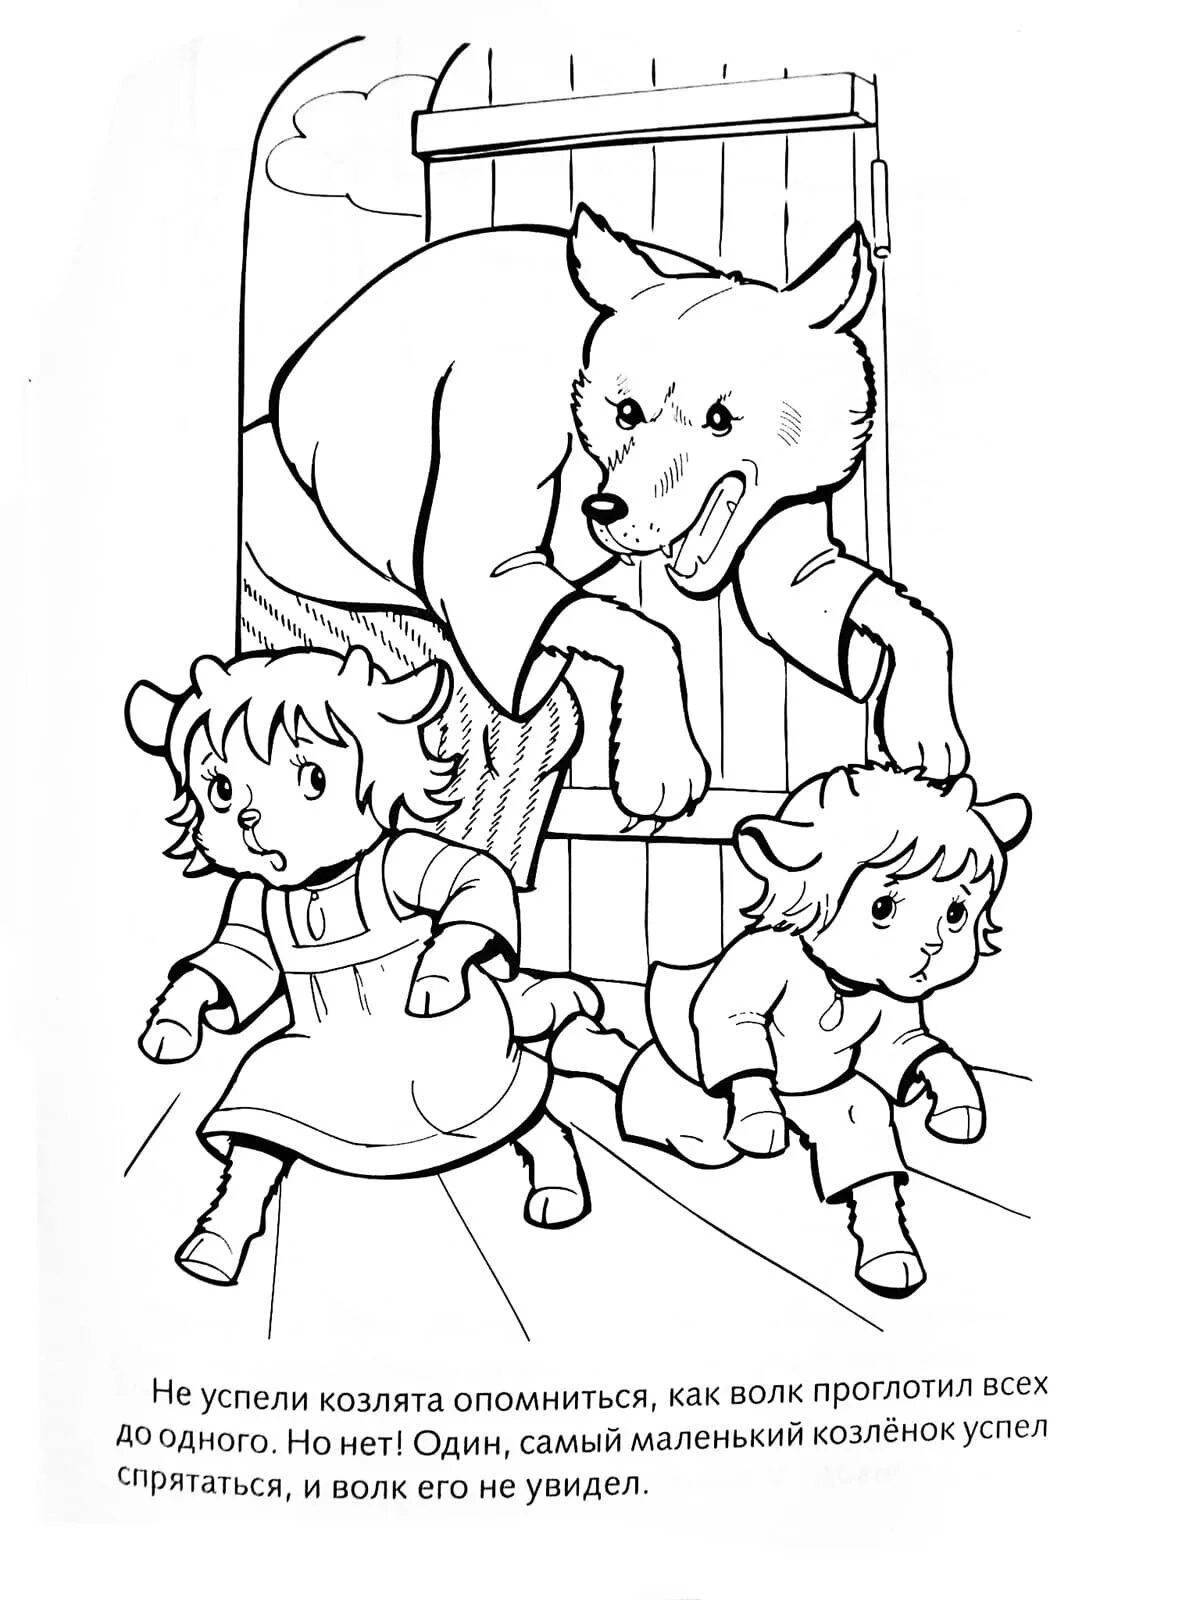 Exciting wolf and seven children coloring book